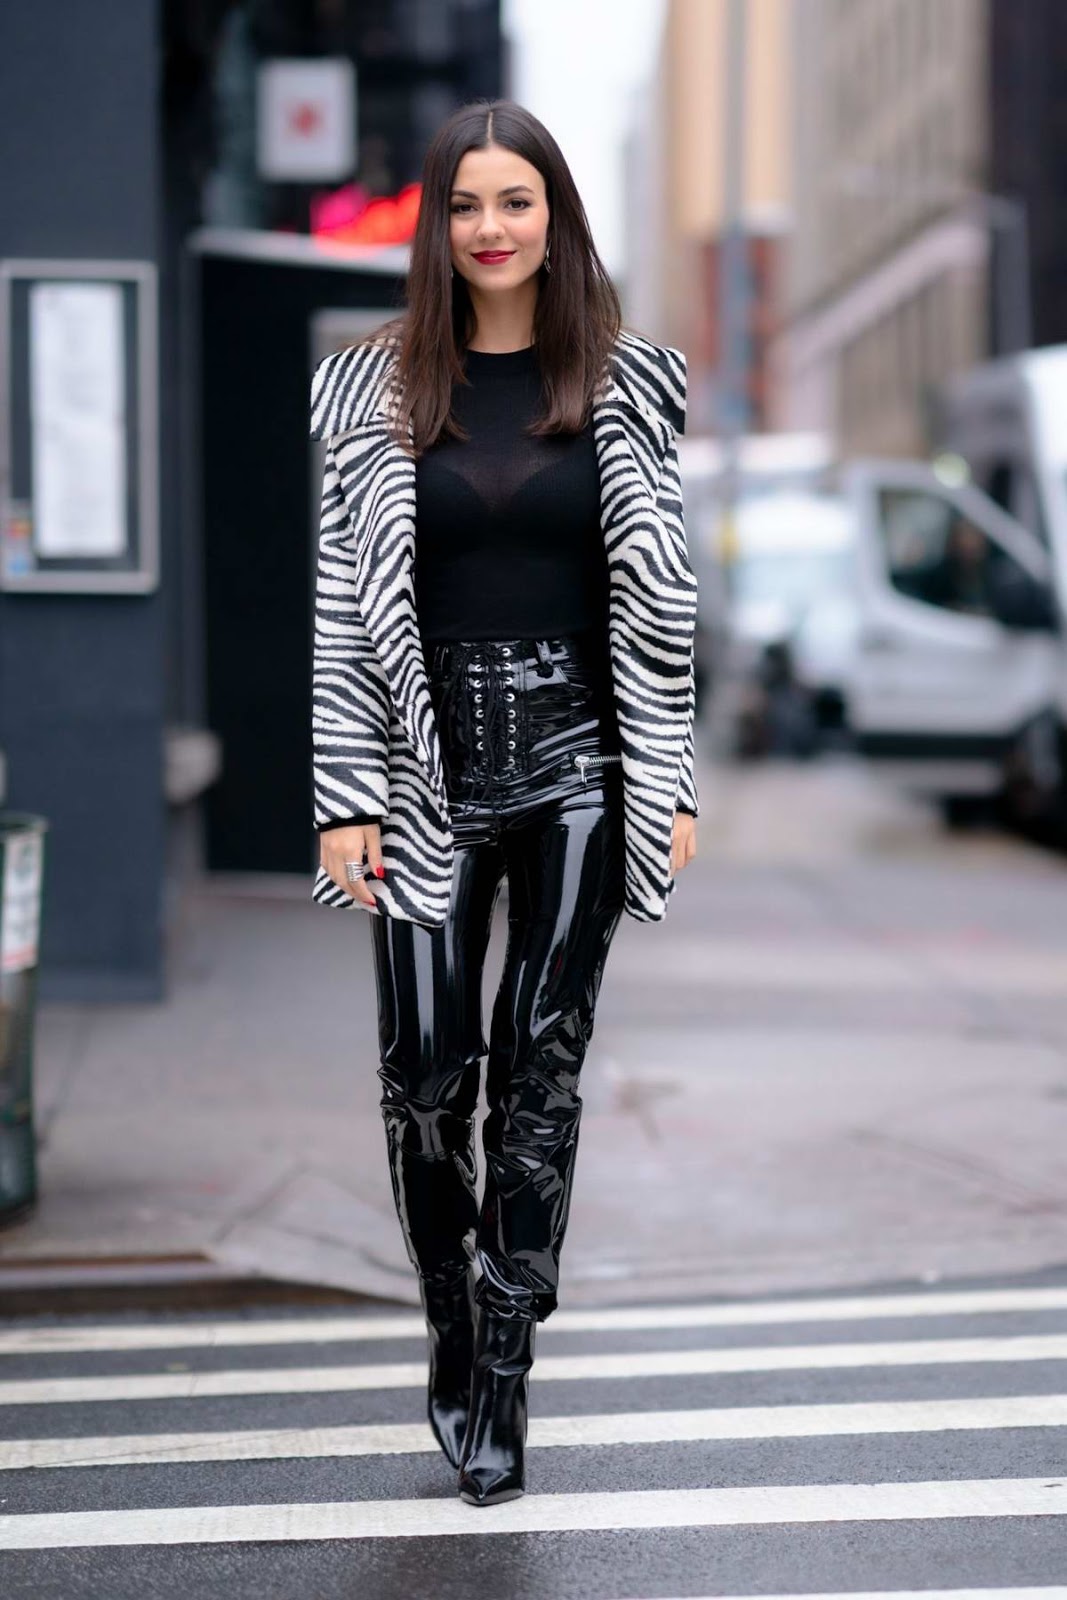 Victoria Justice female celebrity high street style fashion